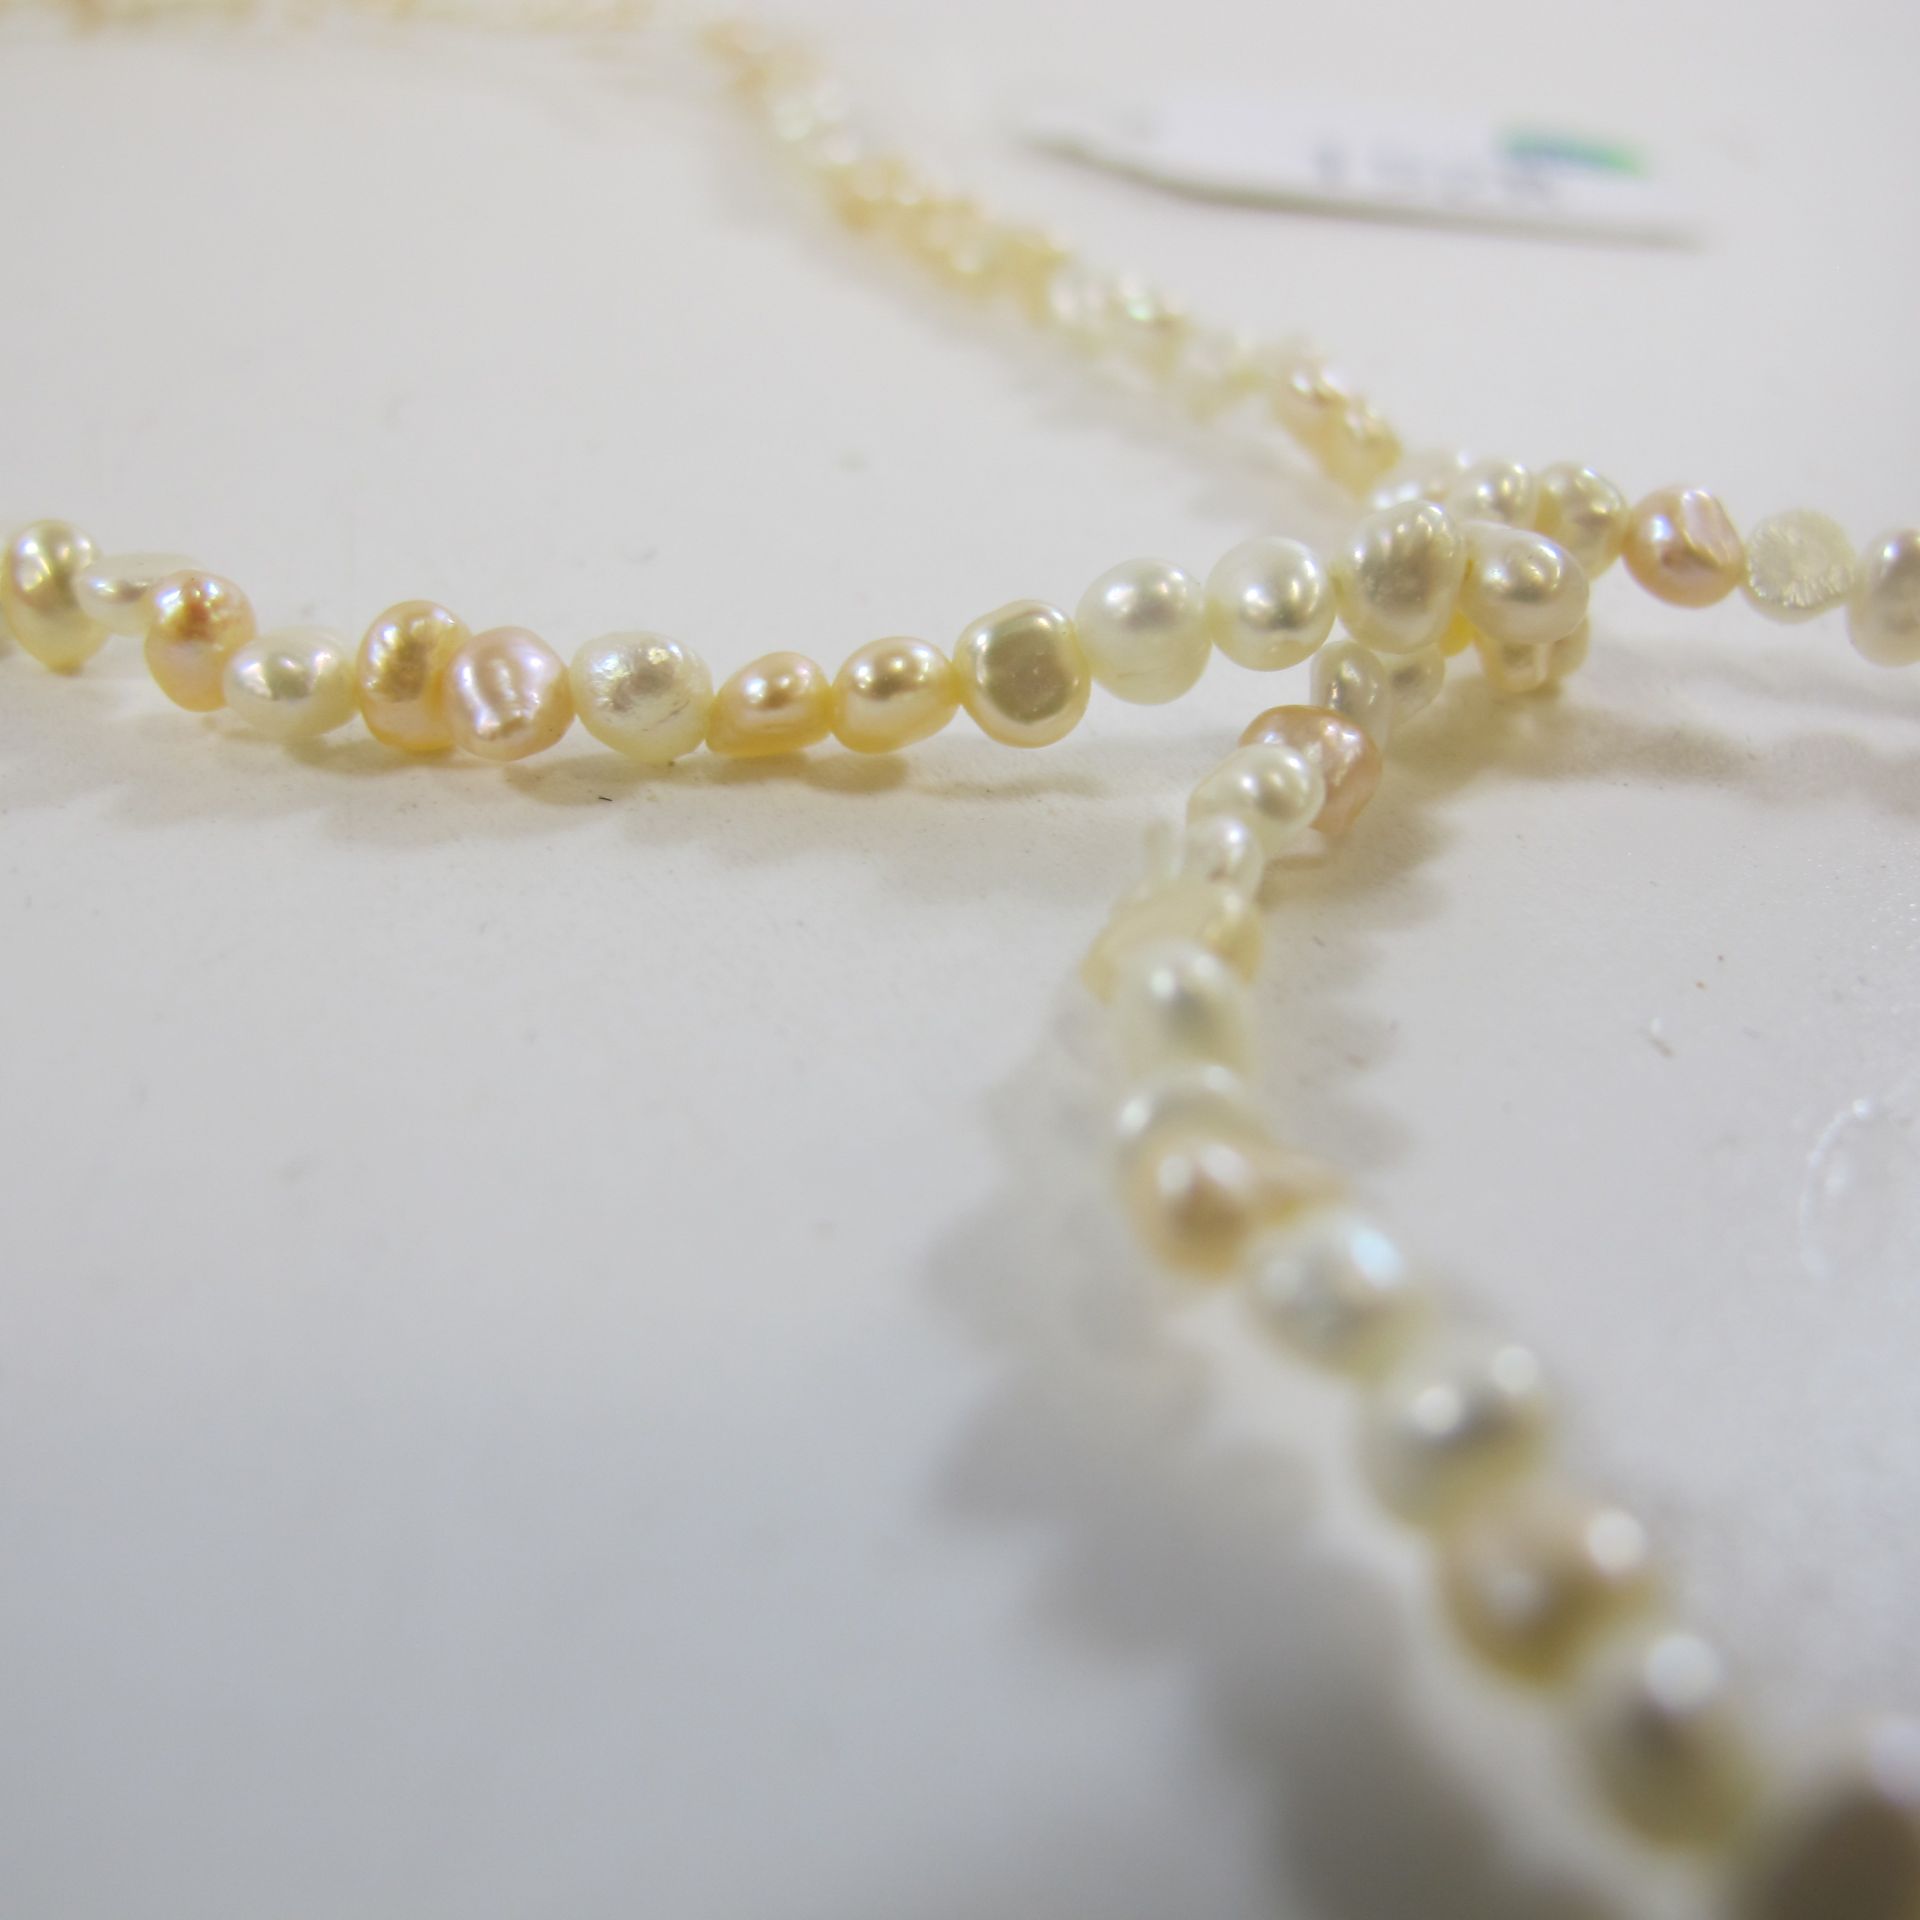 Freshwater Pearl Necklace and Bracelet (est £20-£40) - Image 2 of 2